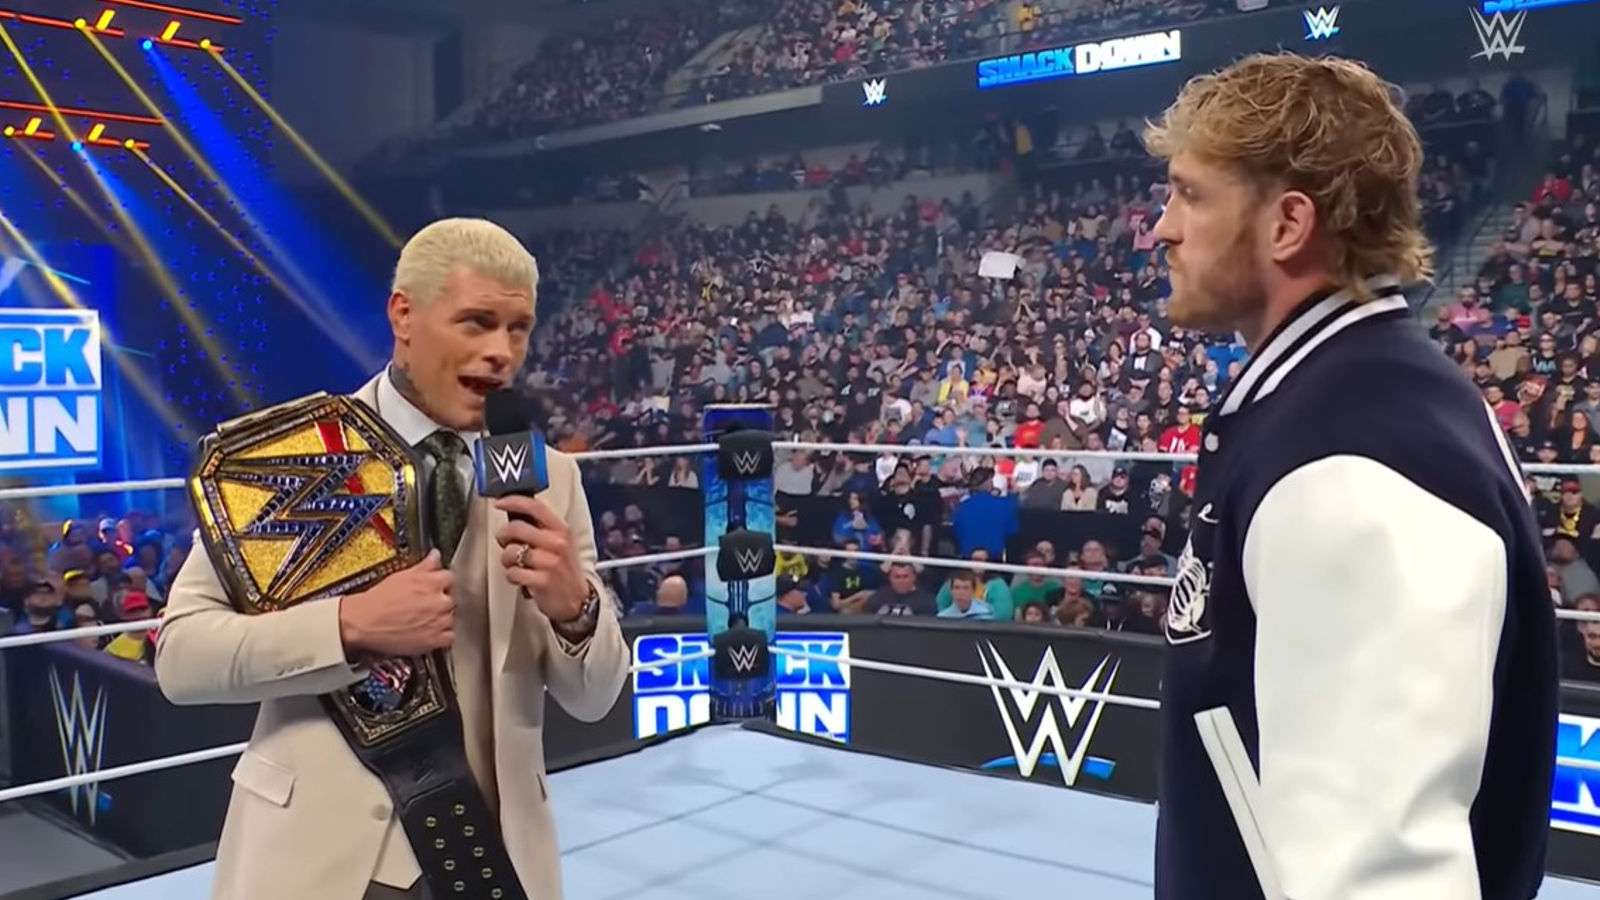 Cody Rhodes and Logan Paul face off on Friday Night Smackdown